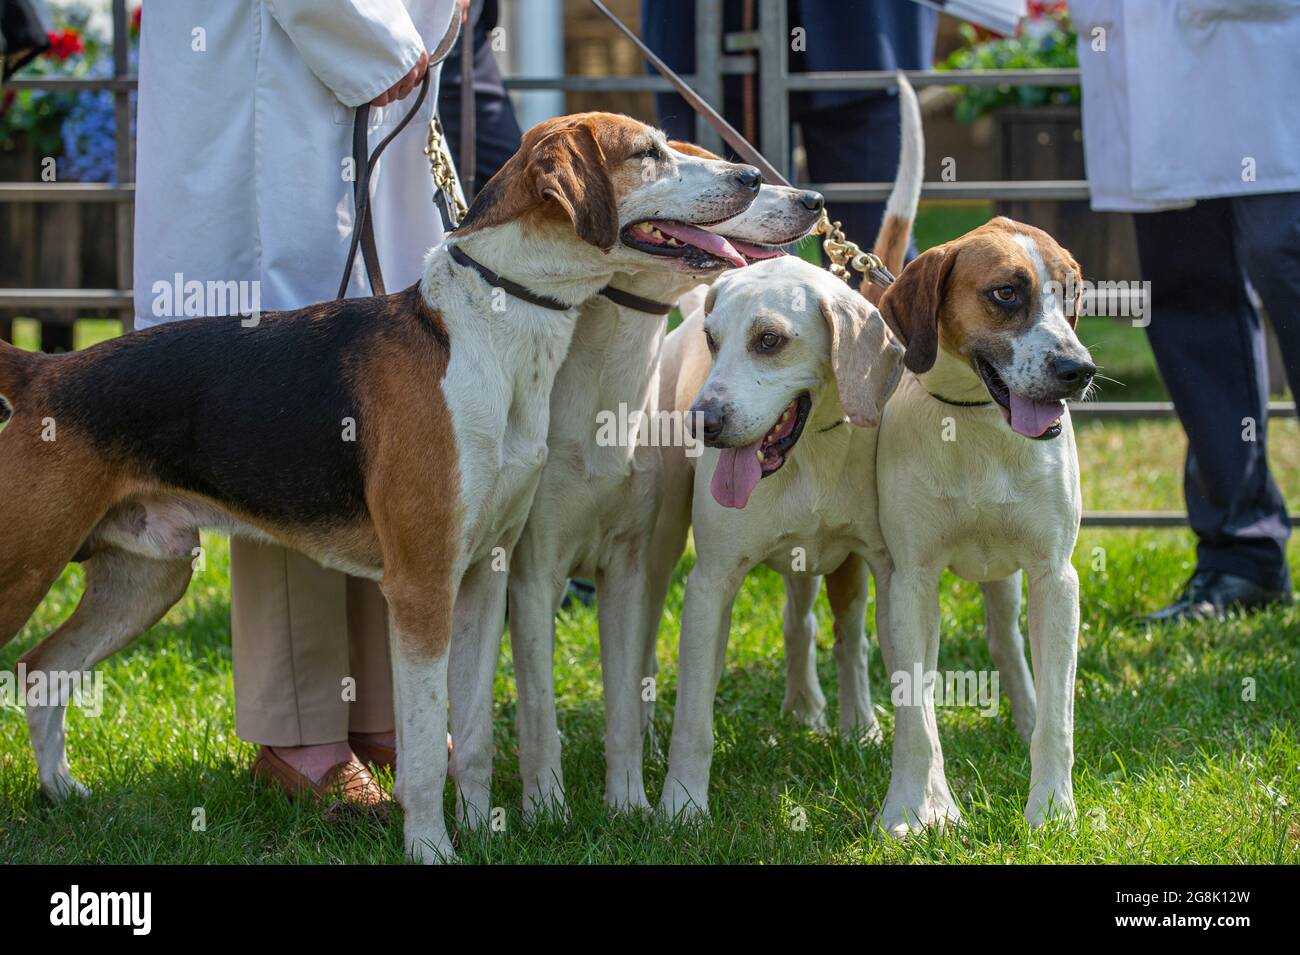 Festival of Hunting, Peterborough, England, UK. 21st July 2021.   This year’s Festival of Hunting played host to the 133rd Peterborough Royal Foxhound Show which also celebrated Beagles, Harriers, Basset Hounds, Draghounds and Bloodhounds making it one of the largest hounds show anywhere in the world. Credit: Matt Limb OBE/Alamy Live New Stock Photo